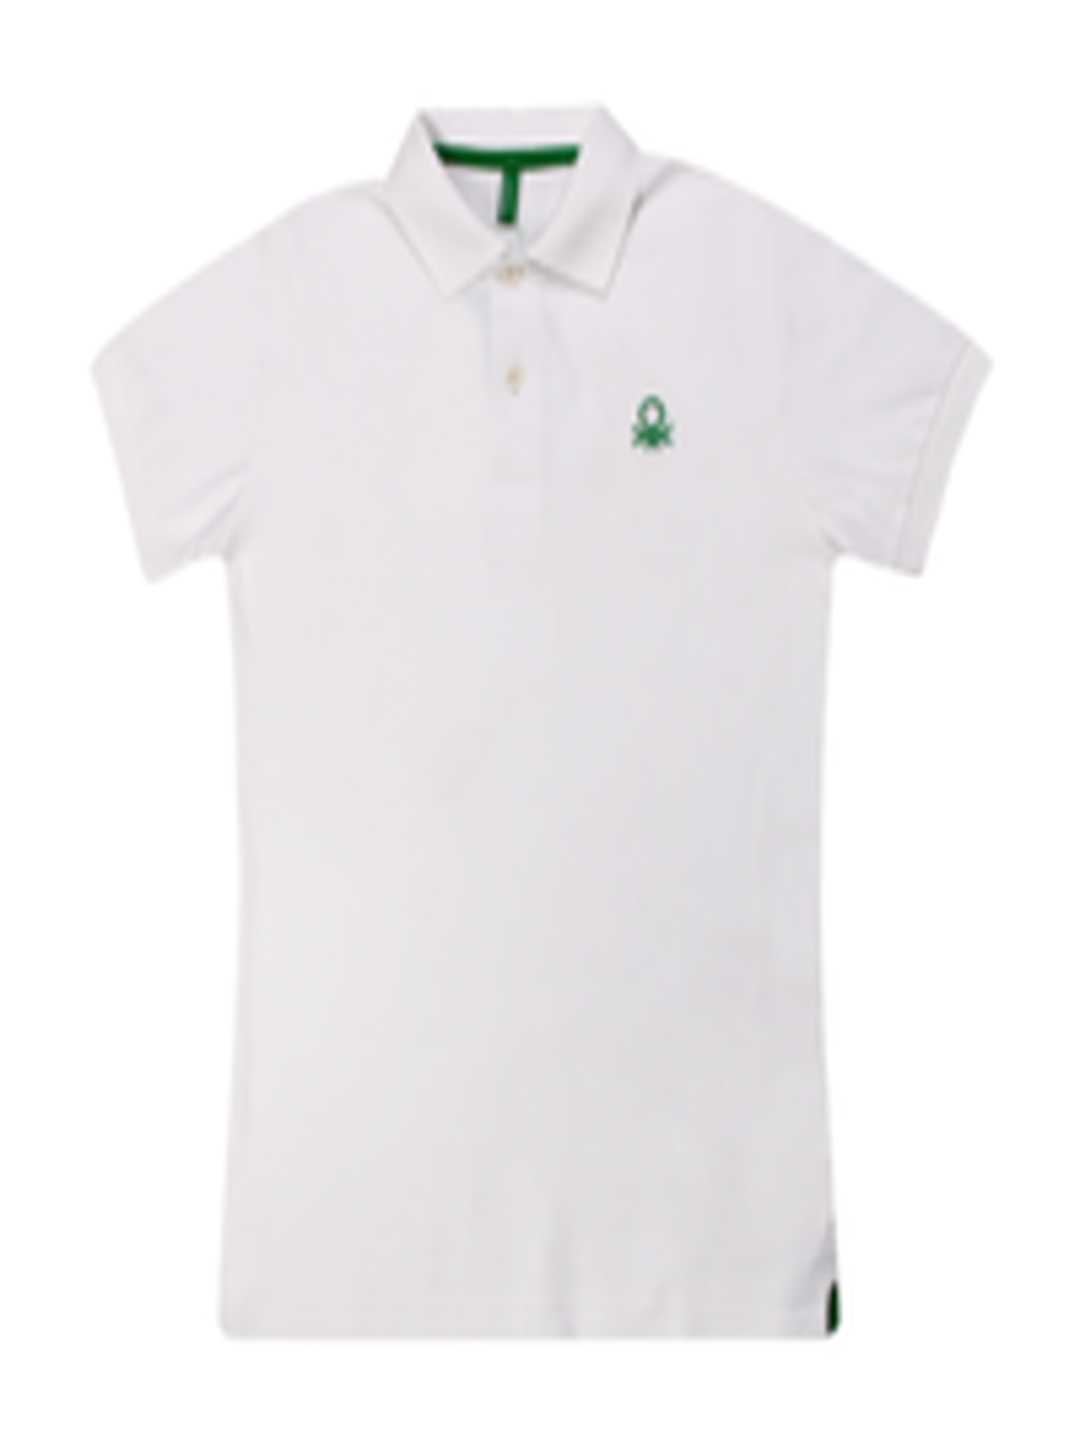 Buy United Colors Of Benetton Boys White Polo Pure Cotton T Shirt ...